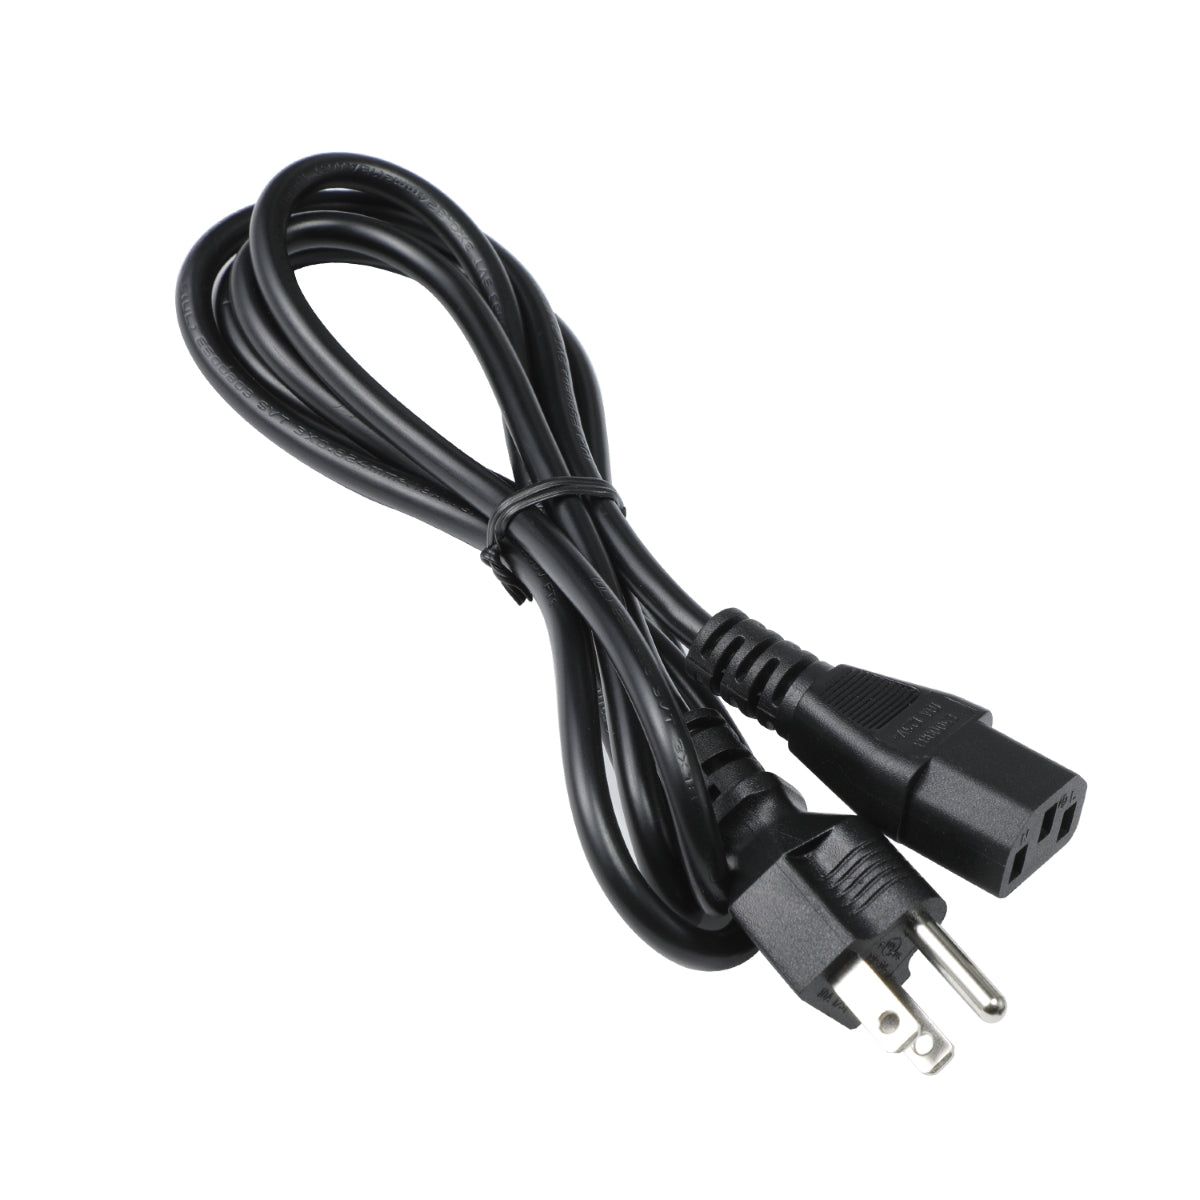 Power Cable for Samsung Plasma TV.